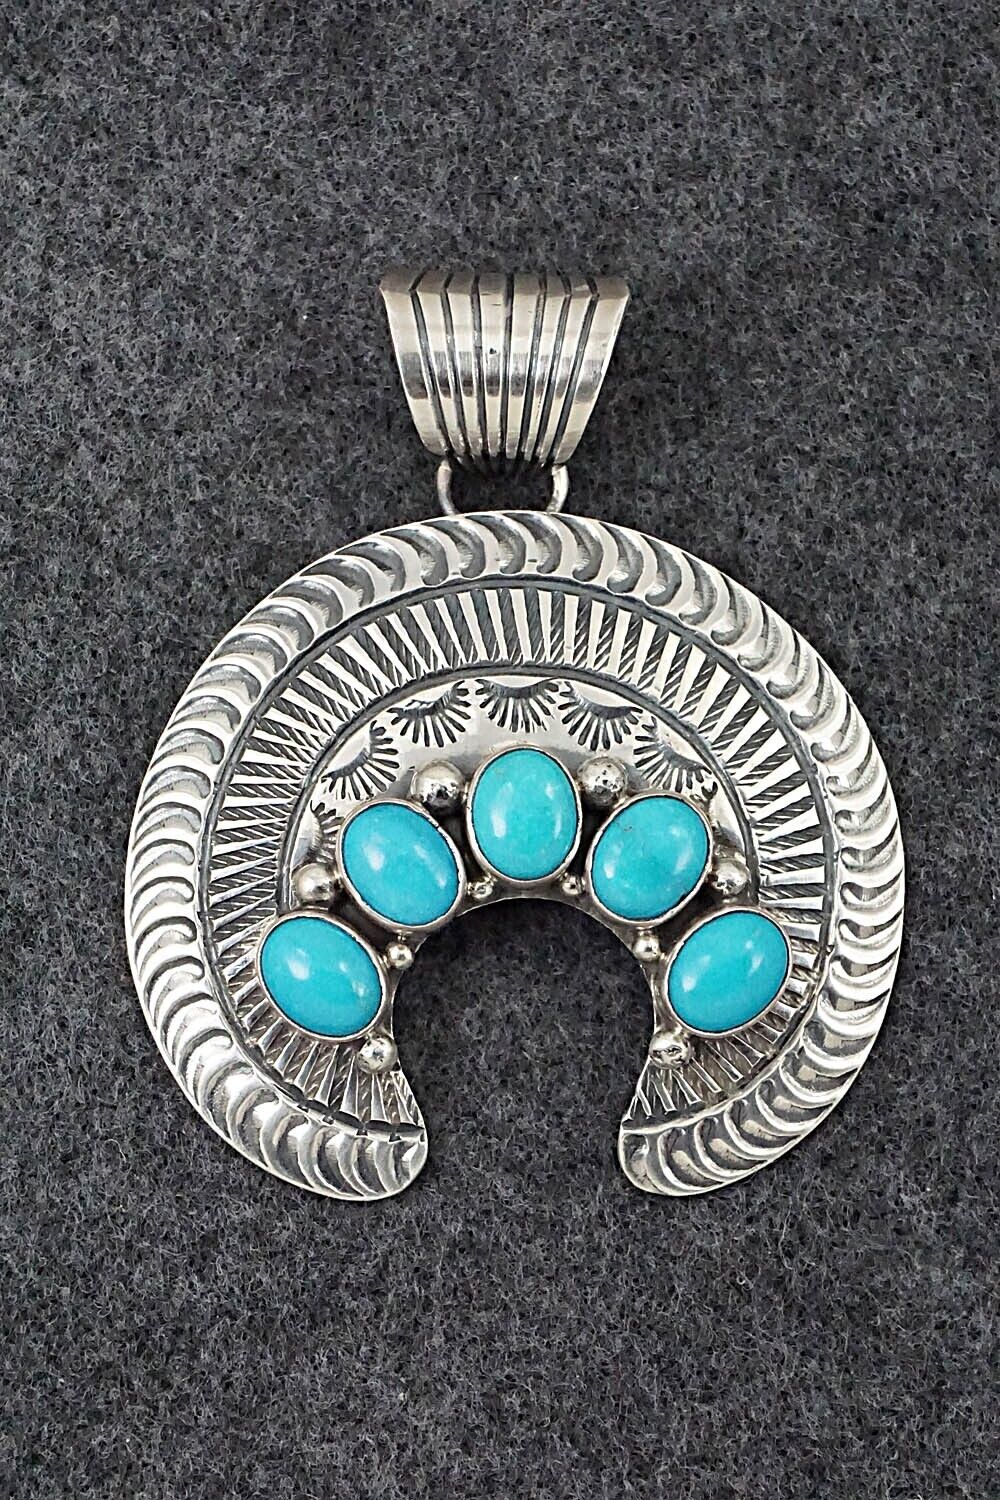 Turquoise and Sterling Silver Pendant - Mary Ann Spencer